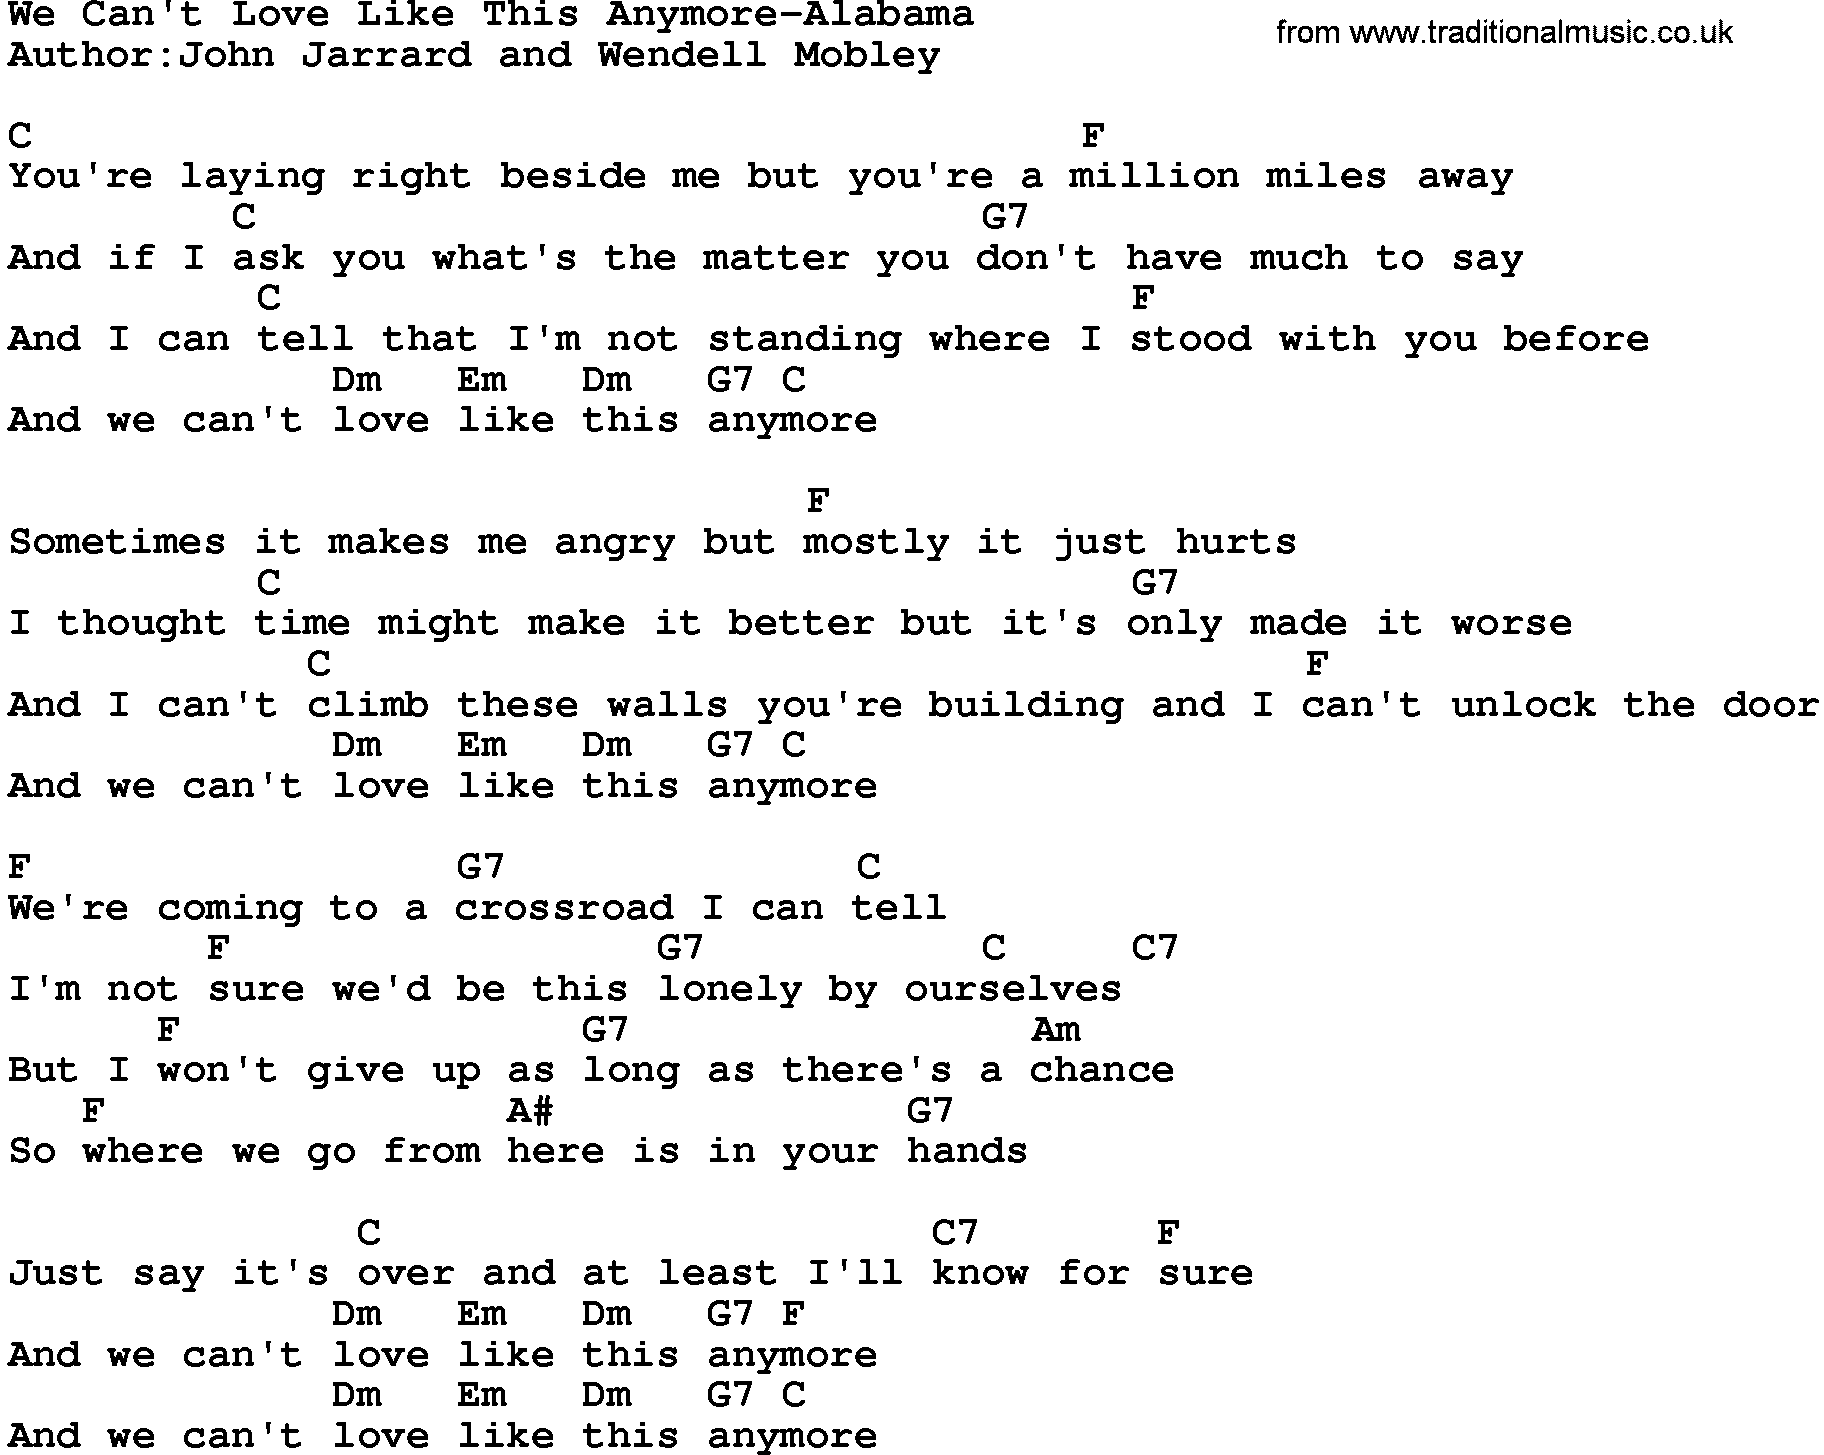 Country music song: We Can't Love Like This Anymore-Alabama lyrics and chords